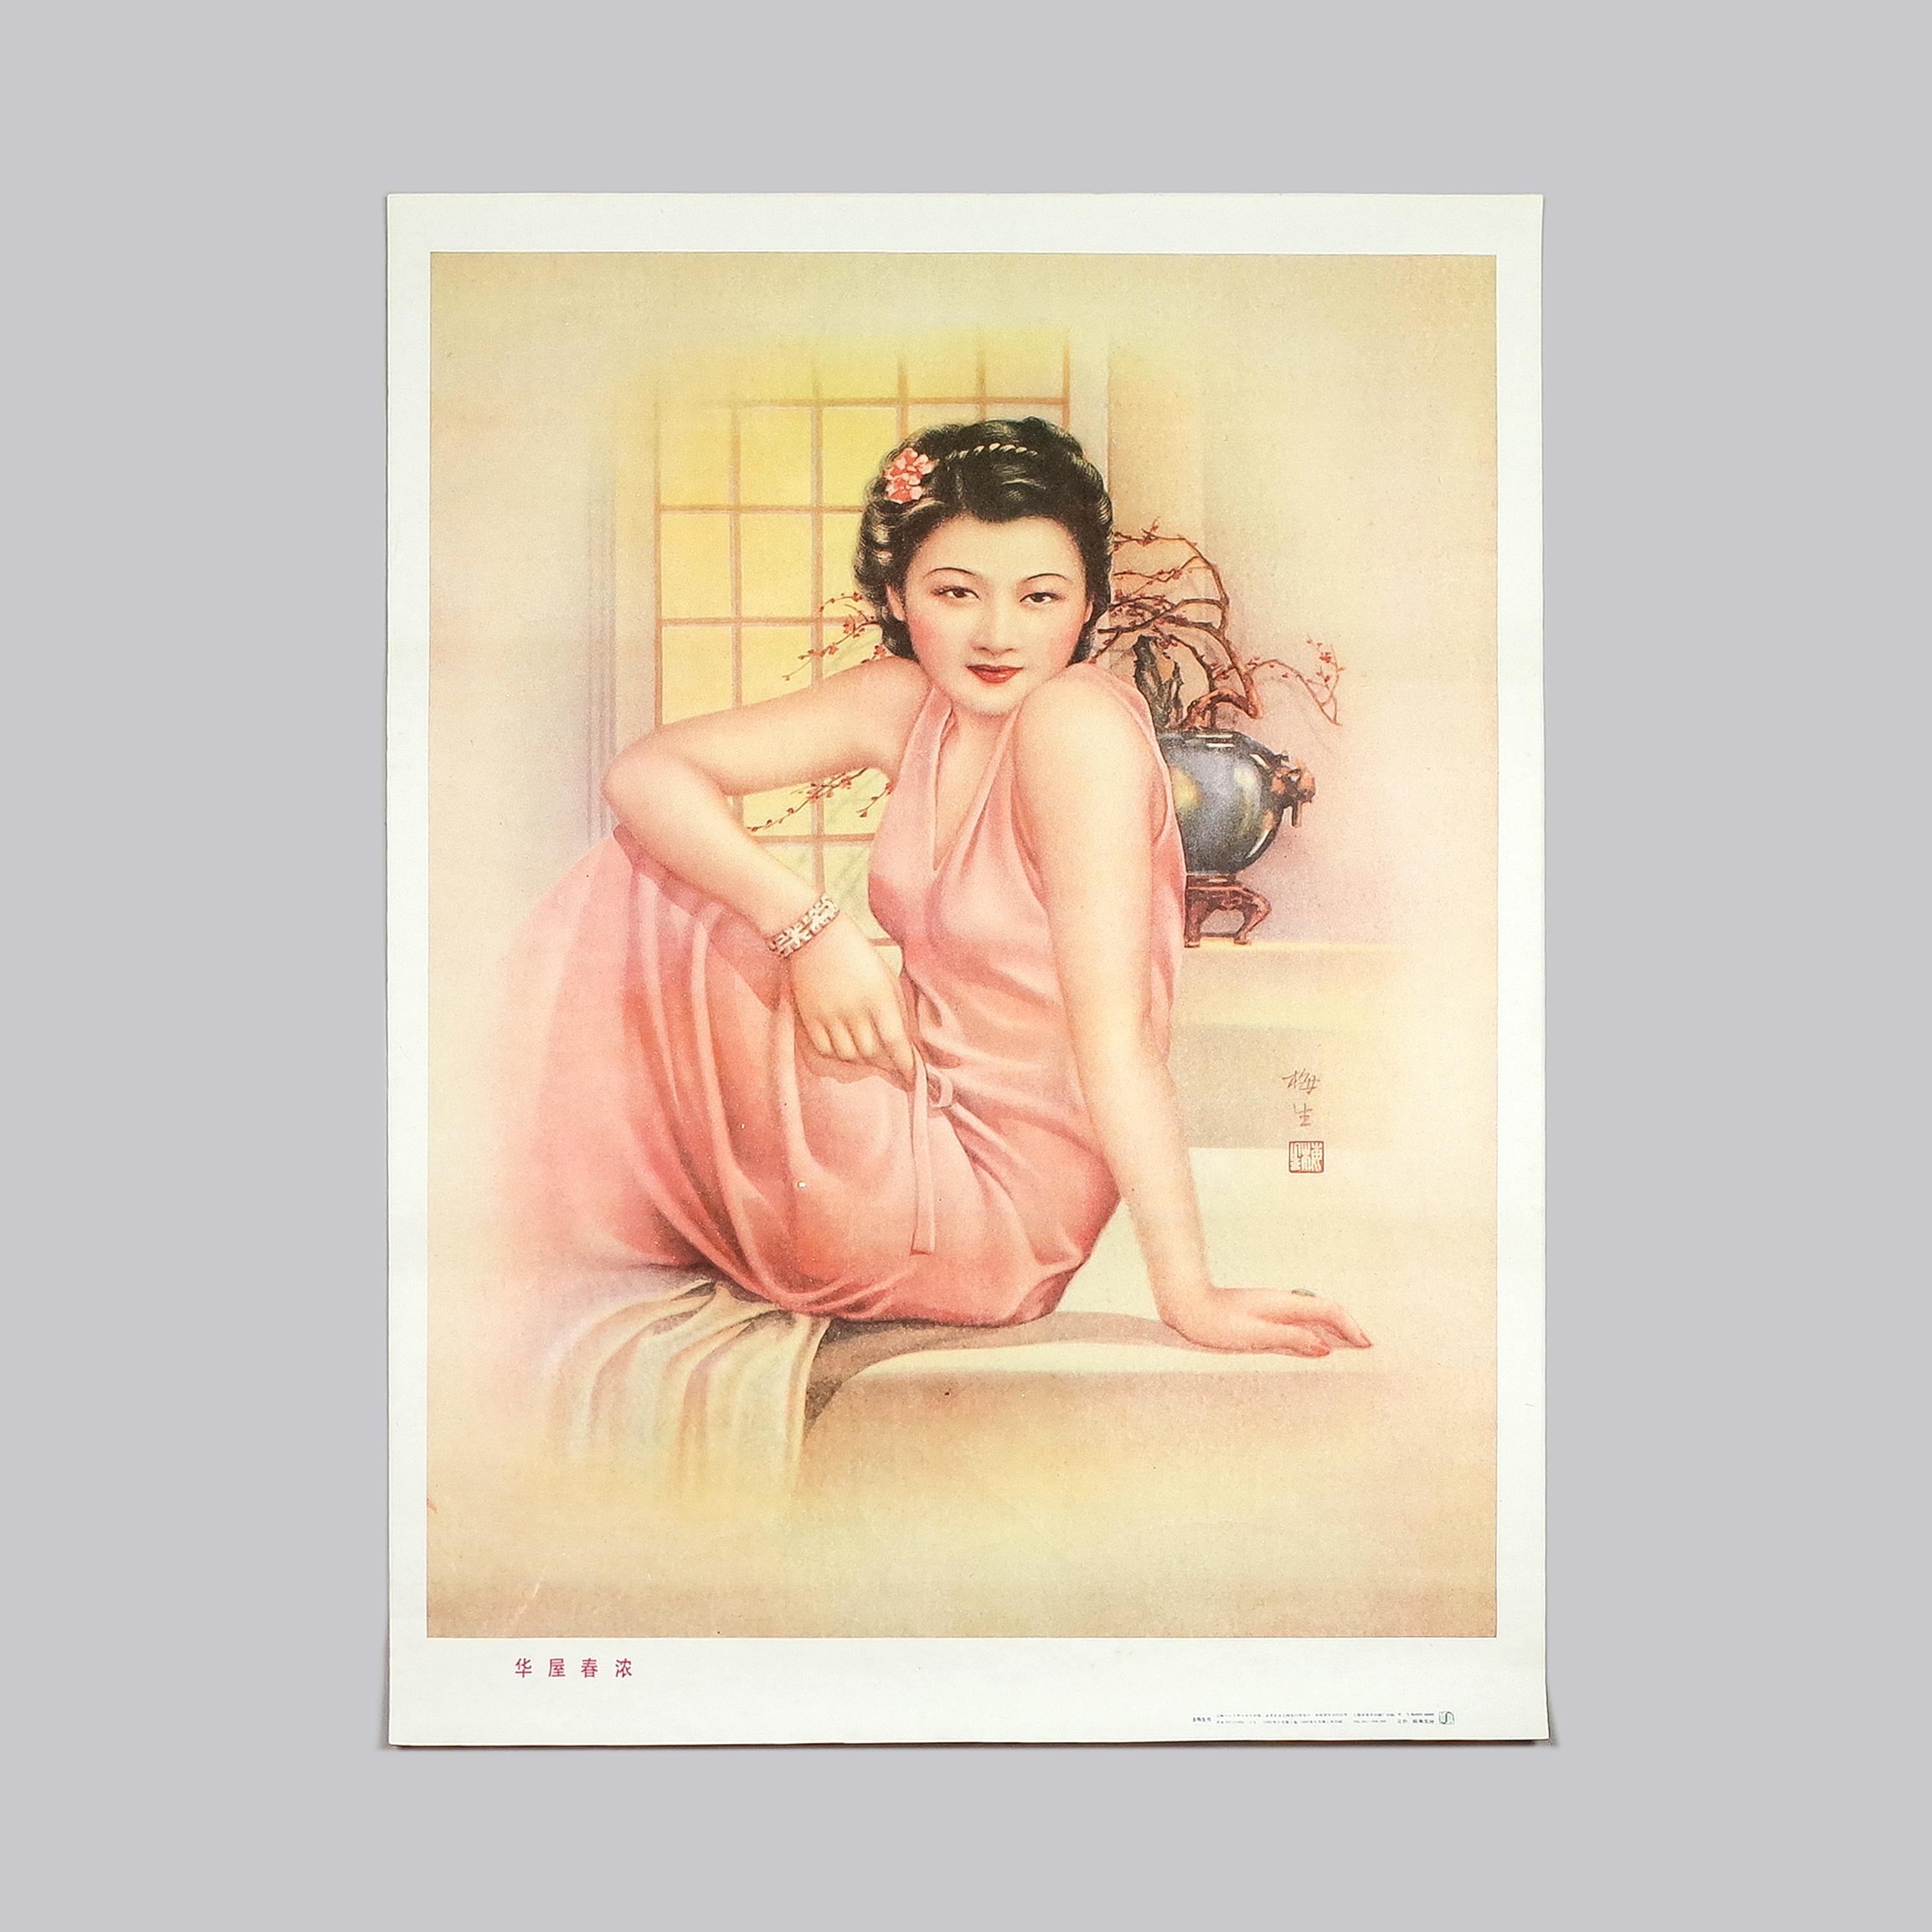 A fabulous 1920s style set of three posters depicting traditionally dressed Shanghai Ladies. Advertisements for clothing, dating back to 1914, they were originally created by the painter Zheng Mantuo. In the early years of the Republic of China